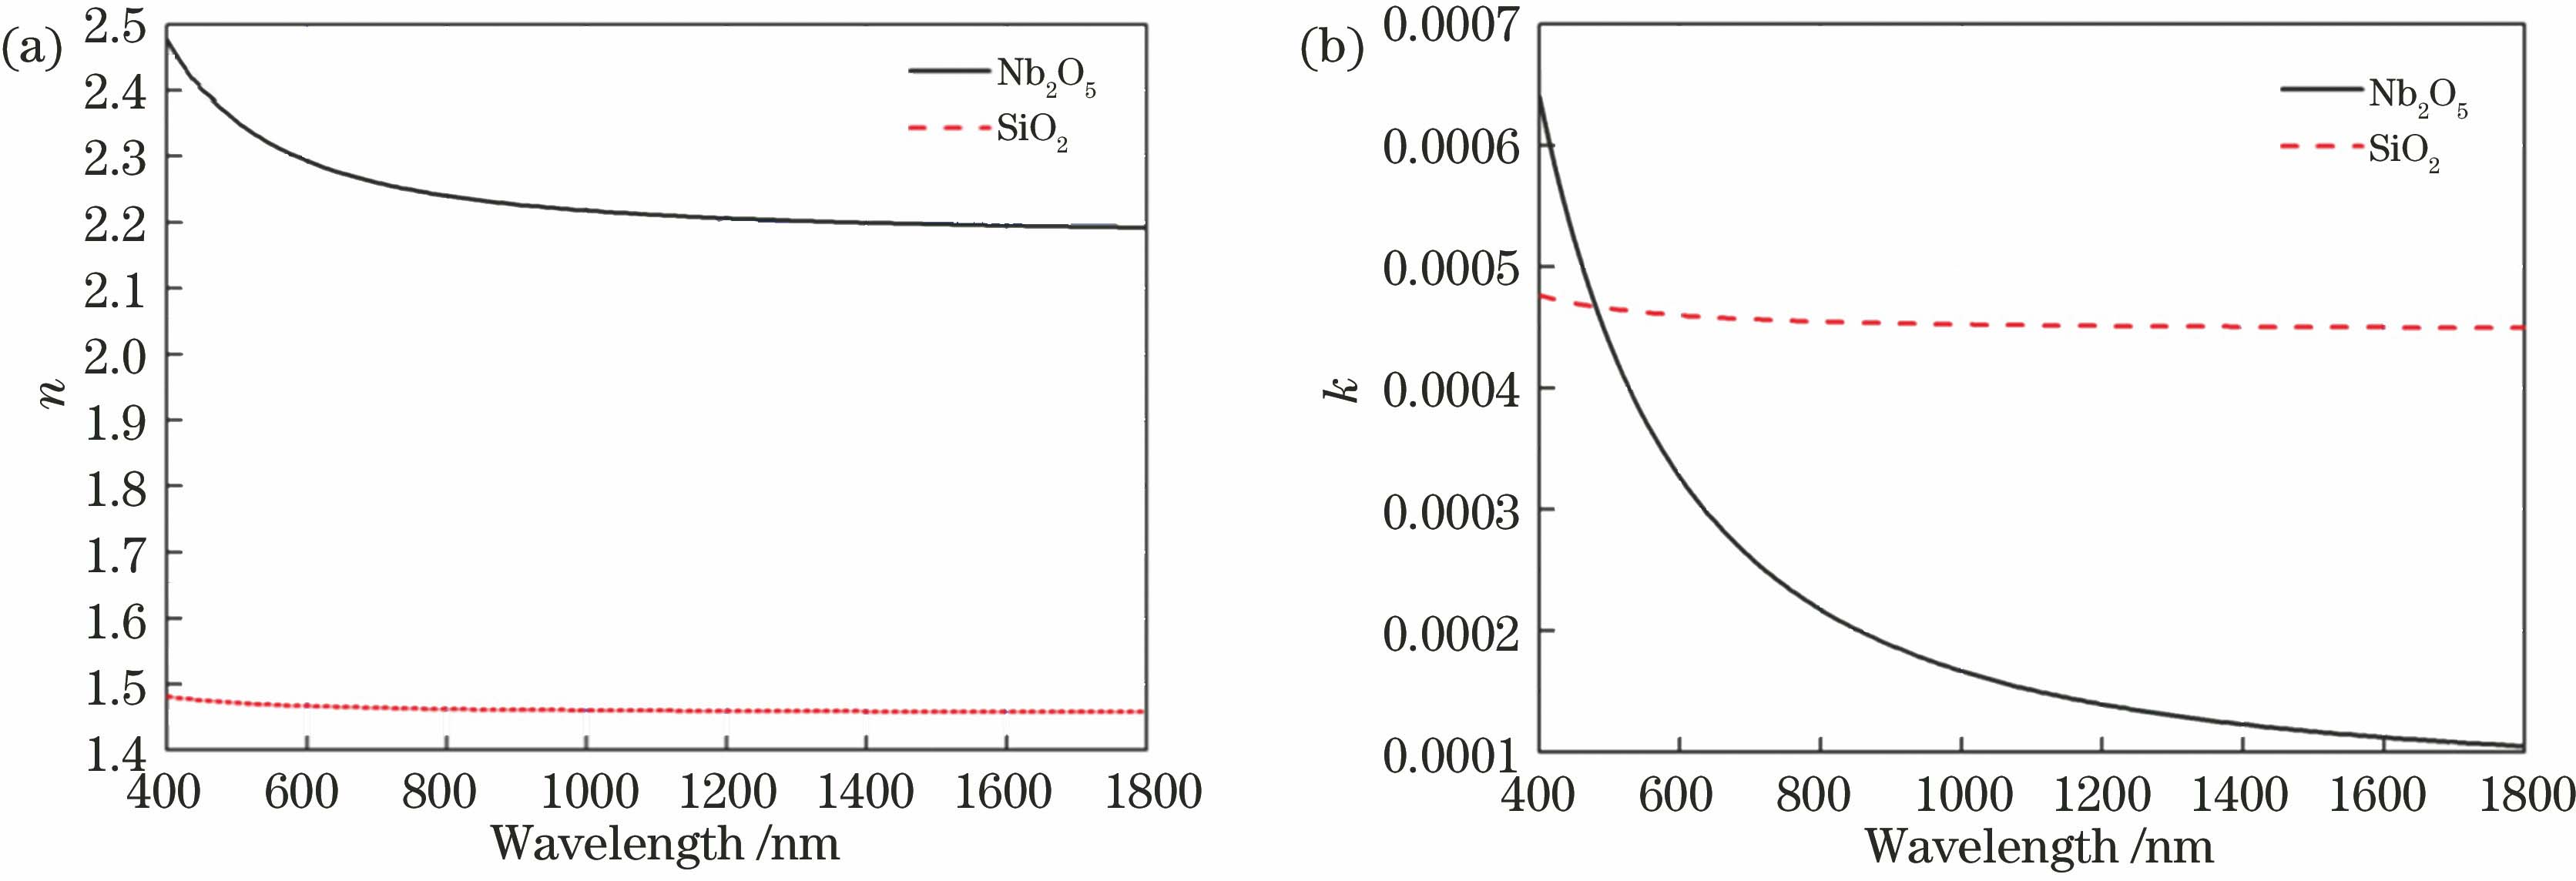 Spectral constant curves of Nb2O5 and SiO2 thin films. (a) Refractive index n; (b) extinction coefficients k